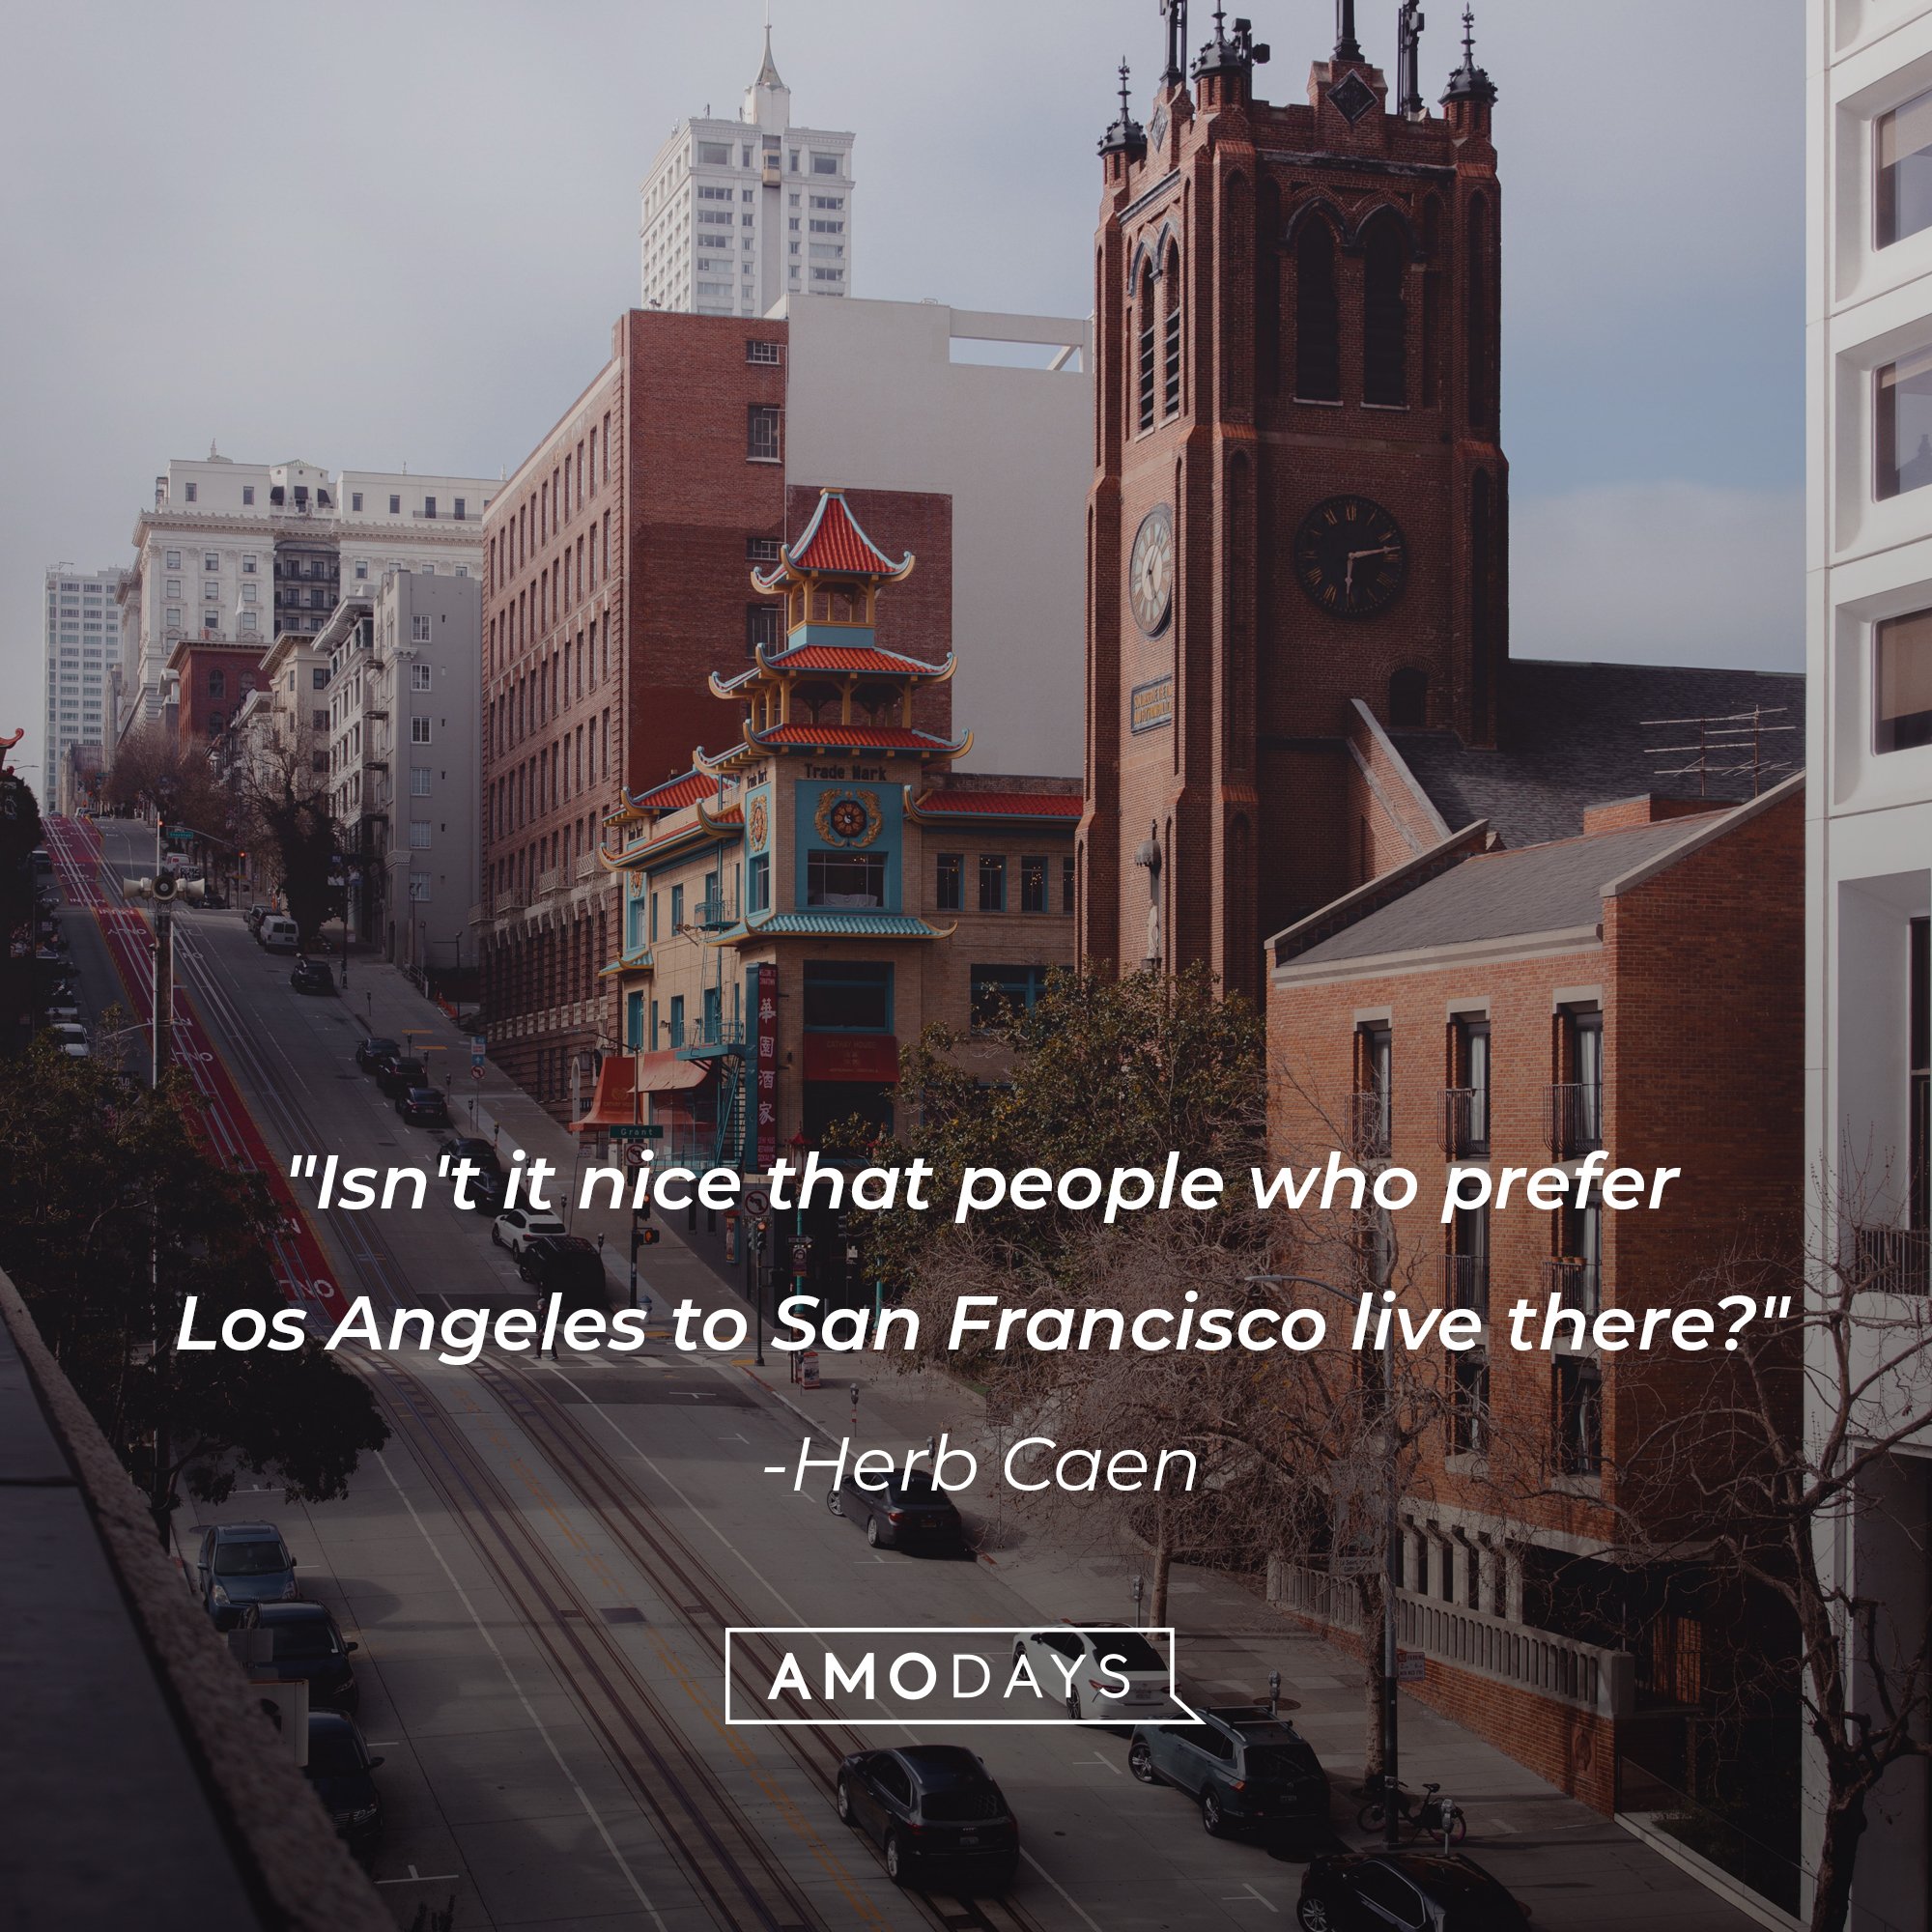  Herb Caen’s quote: "Isn't it nice that people who prefer Los Angeles to San Francisco live there?" | Image: AmoDays